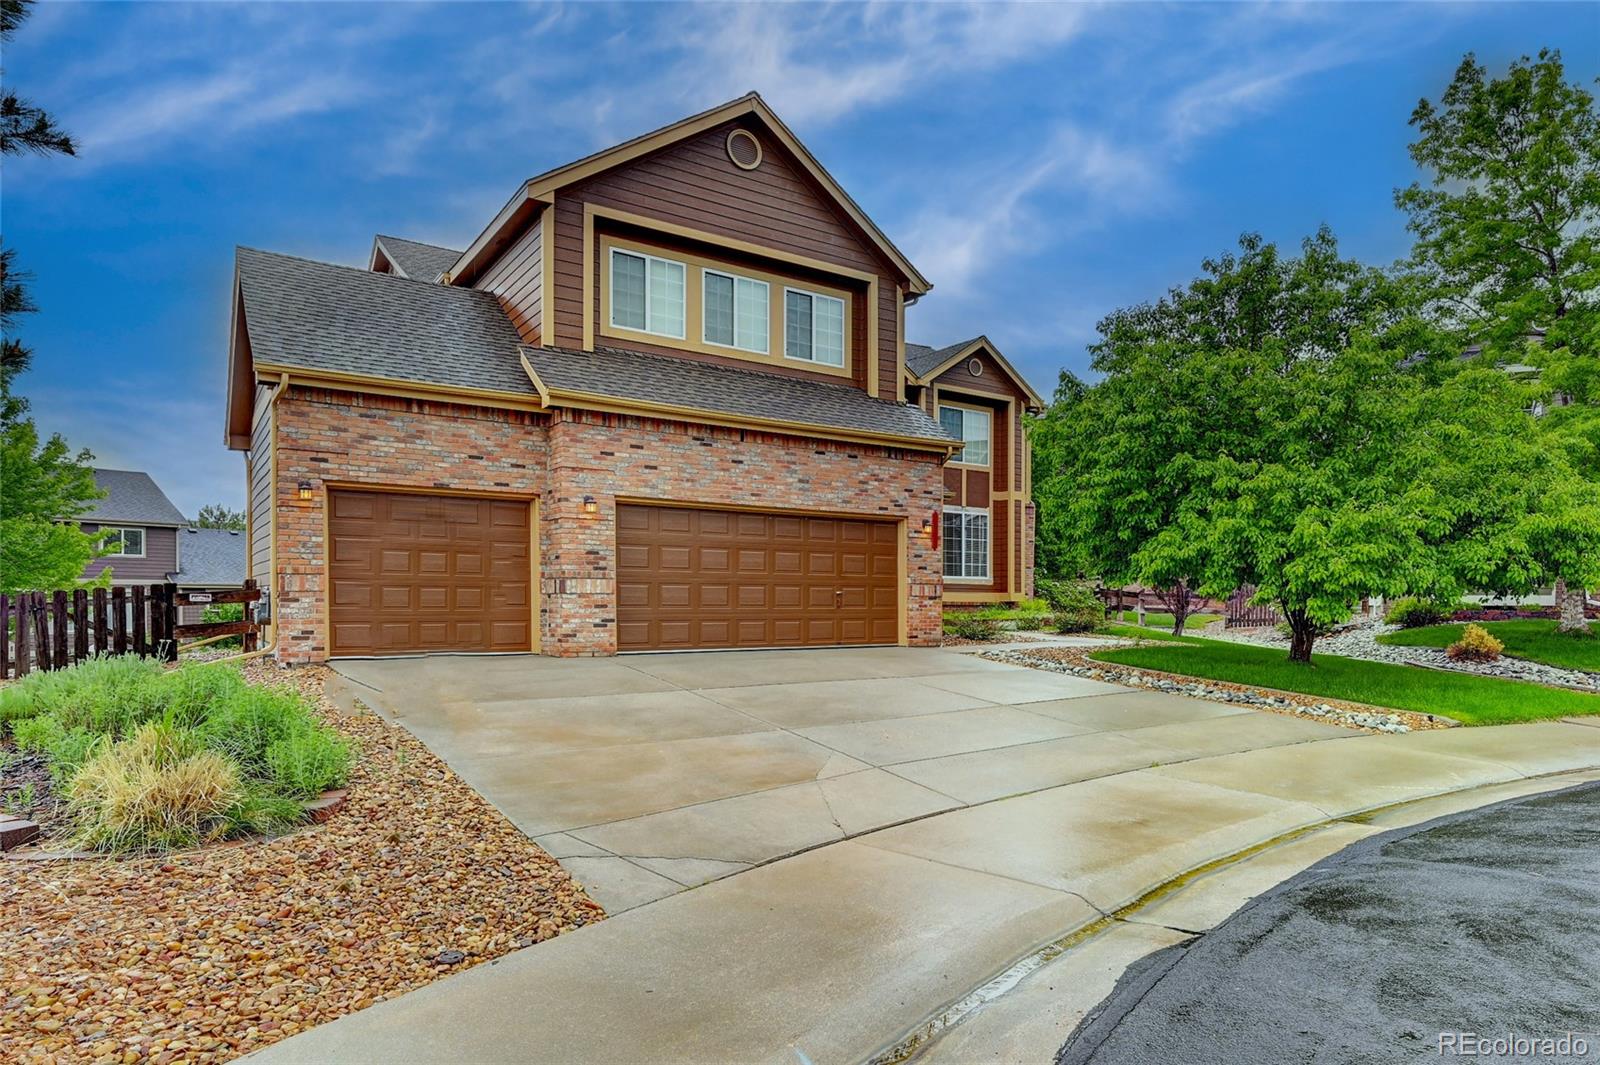 1622  Rosemary Court, castle rock MLS: 2828057 Beds: 4 Baths: 4 Price: $807,000